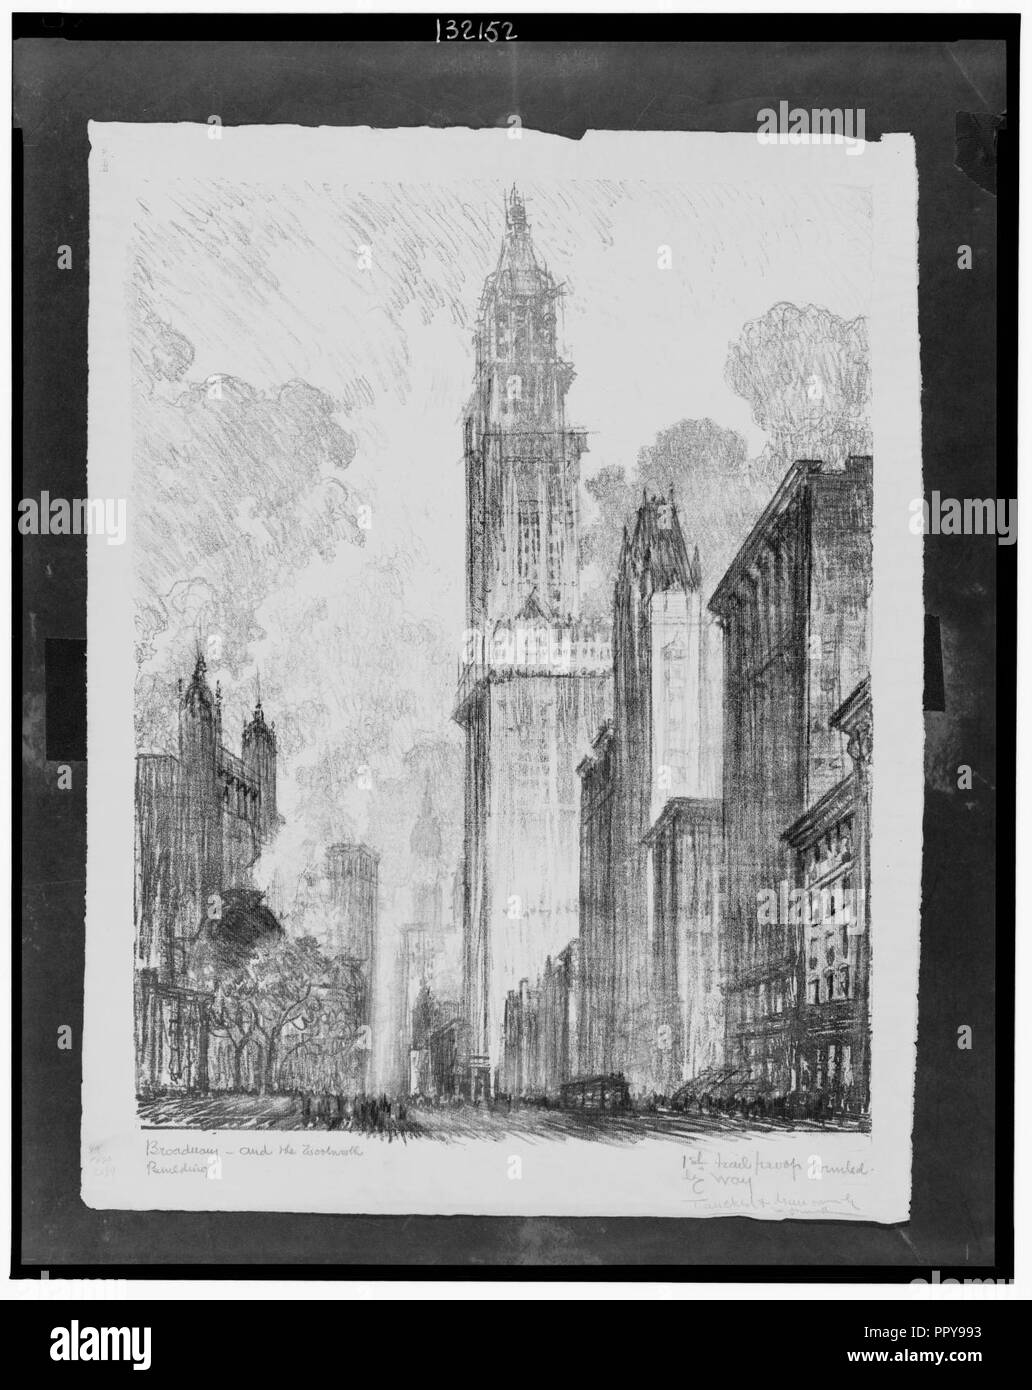 Broadway and the Woolworth Building - J. Pennell. Stock Photo